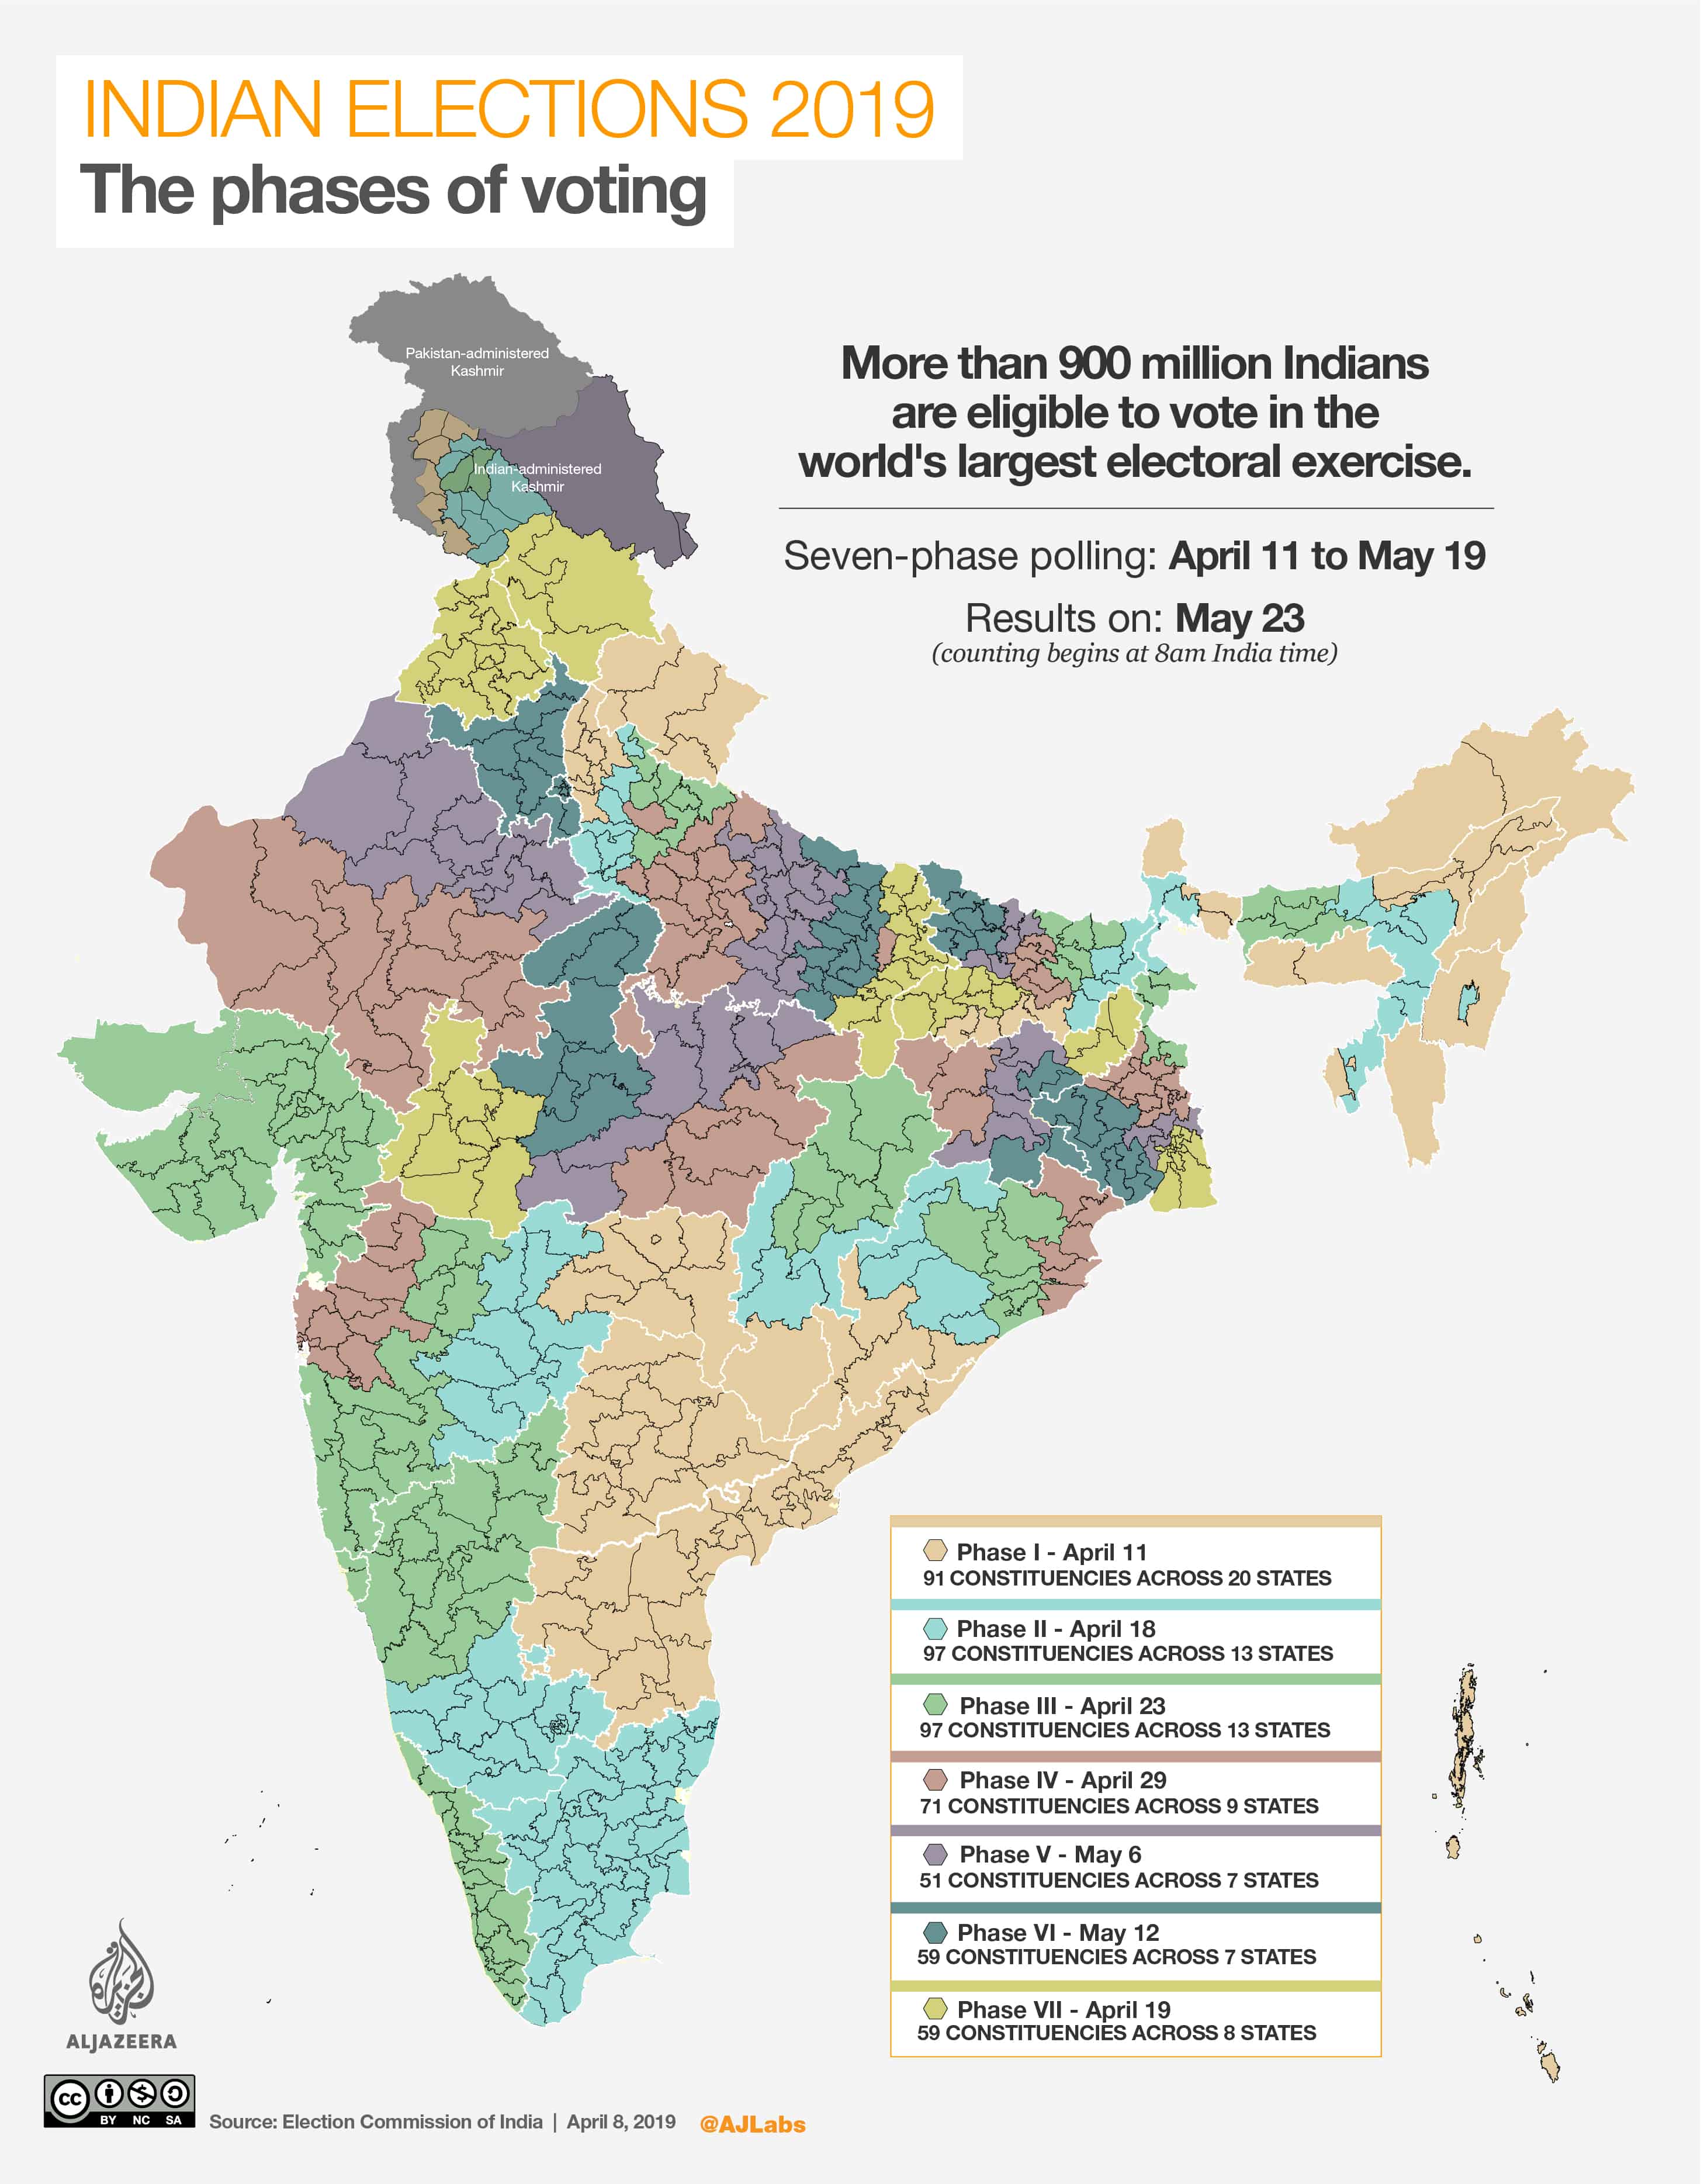 Indian Elections 2019 - Facts and Figures - House of the People Lok Sabha Lower House Elections Results on May 23